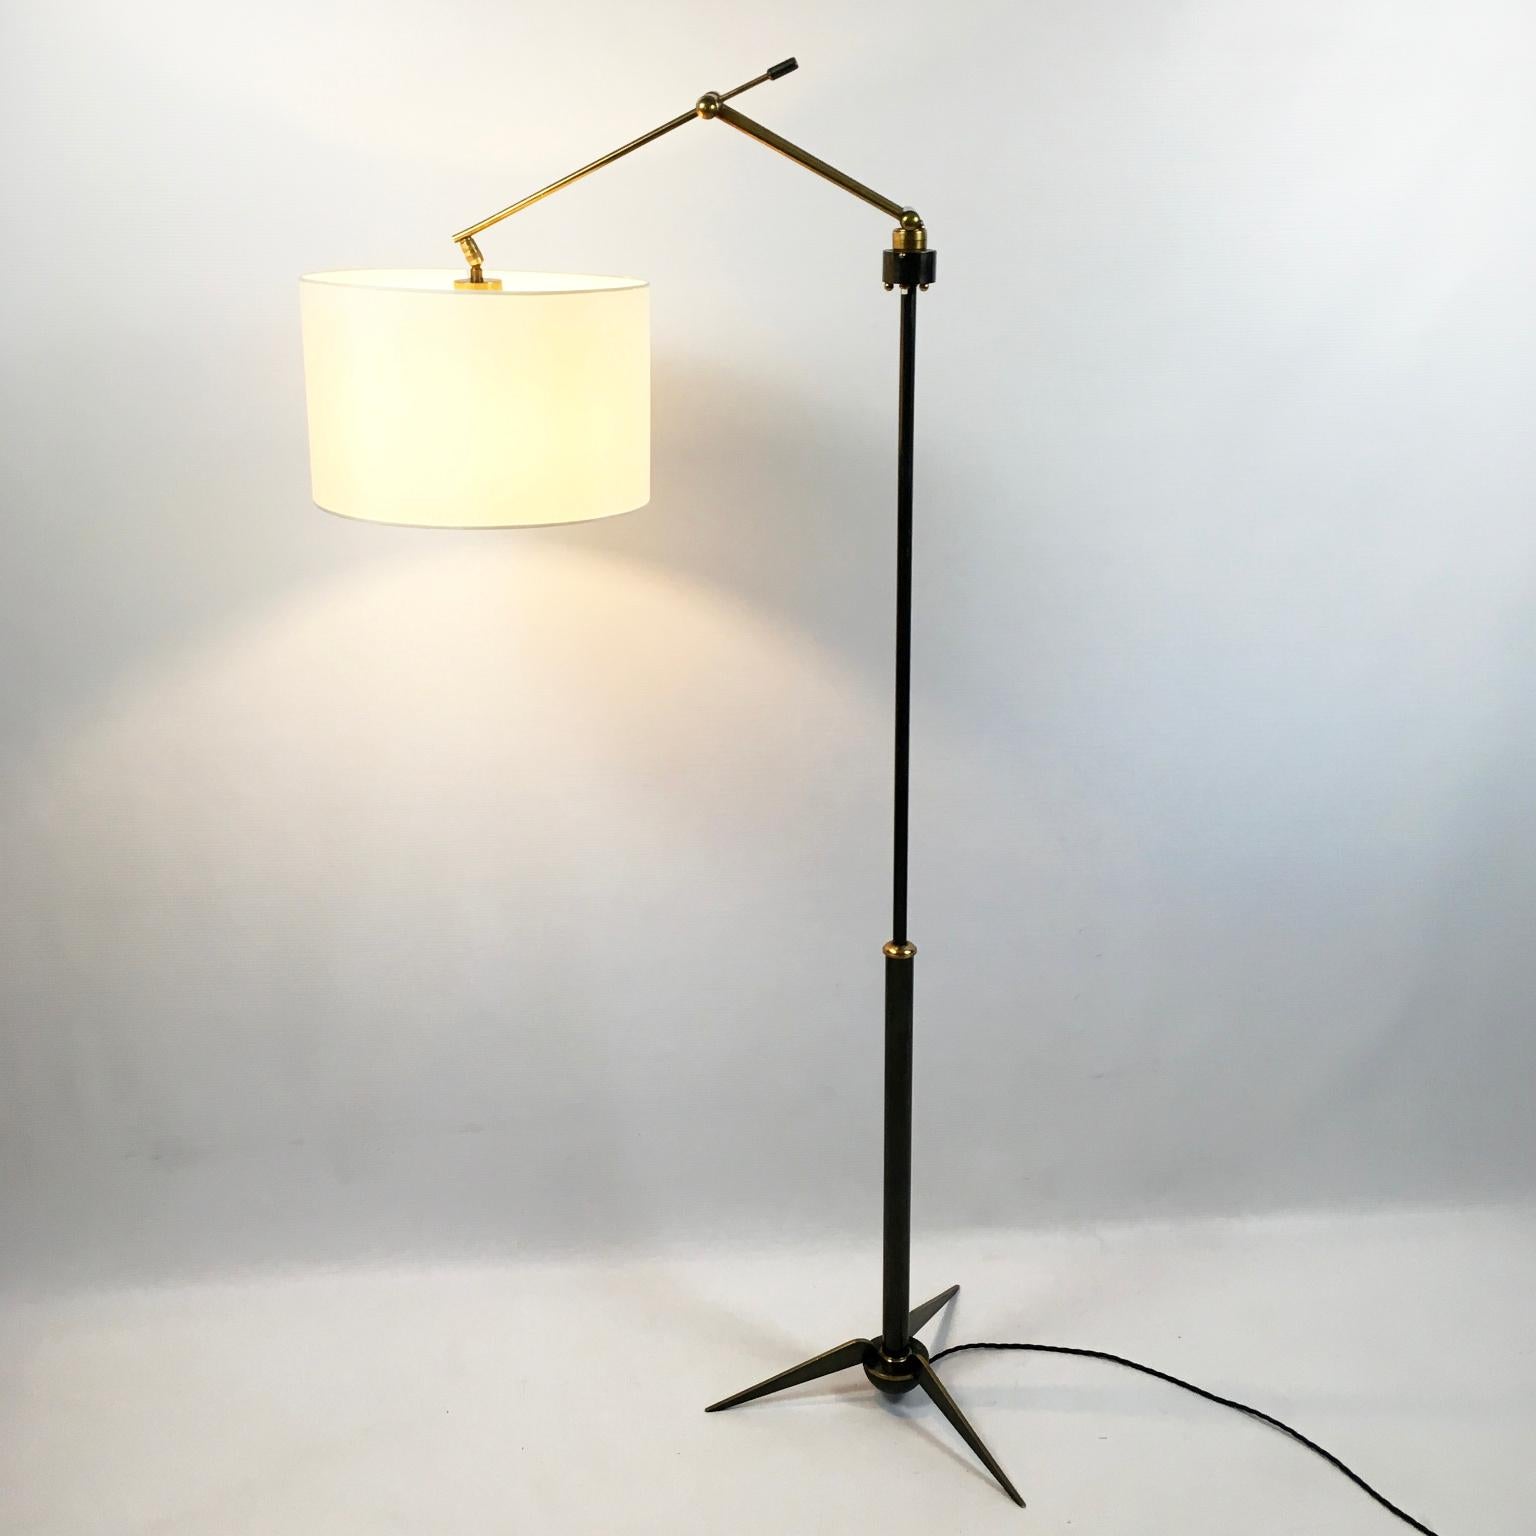 1950s floor lamp manufactured and edited by Maison Lunel, France
Brass adjustable and swivel arm with a gun barrel patina finish base
Rewired with black cotton insulated cable.